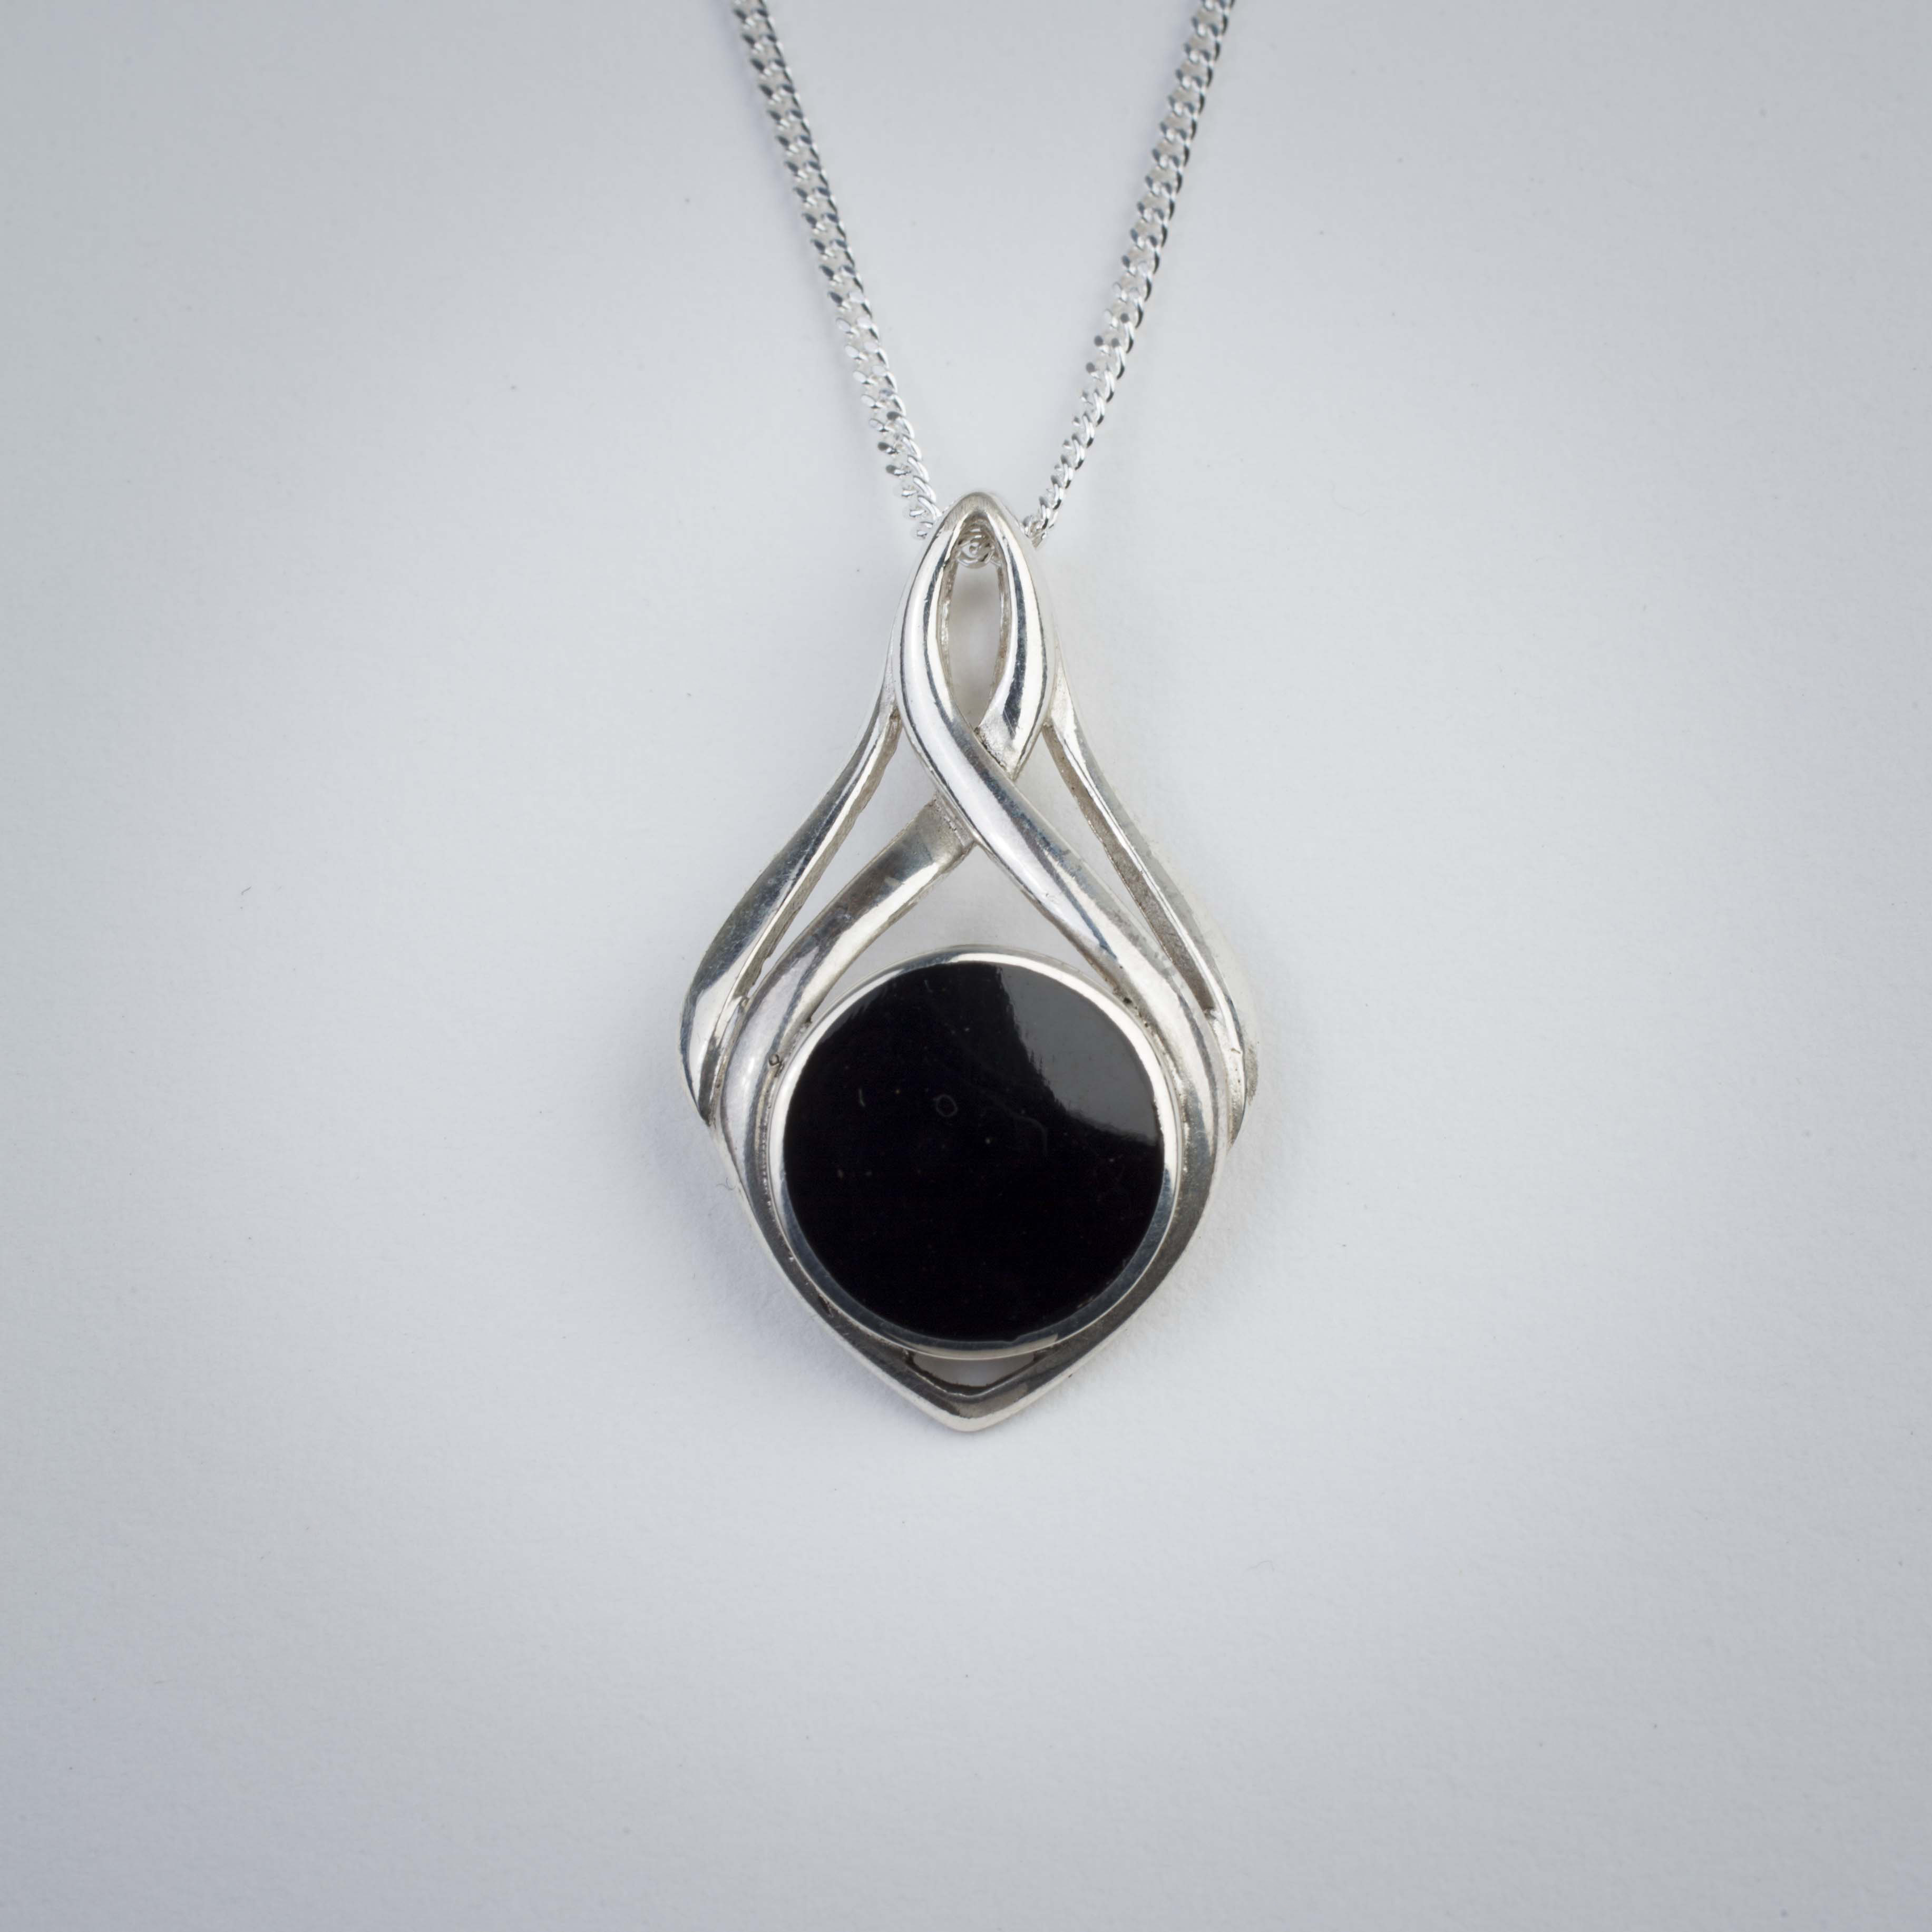 whitby jet and sterling silver pendant Hand made in whitby